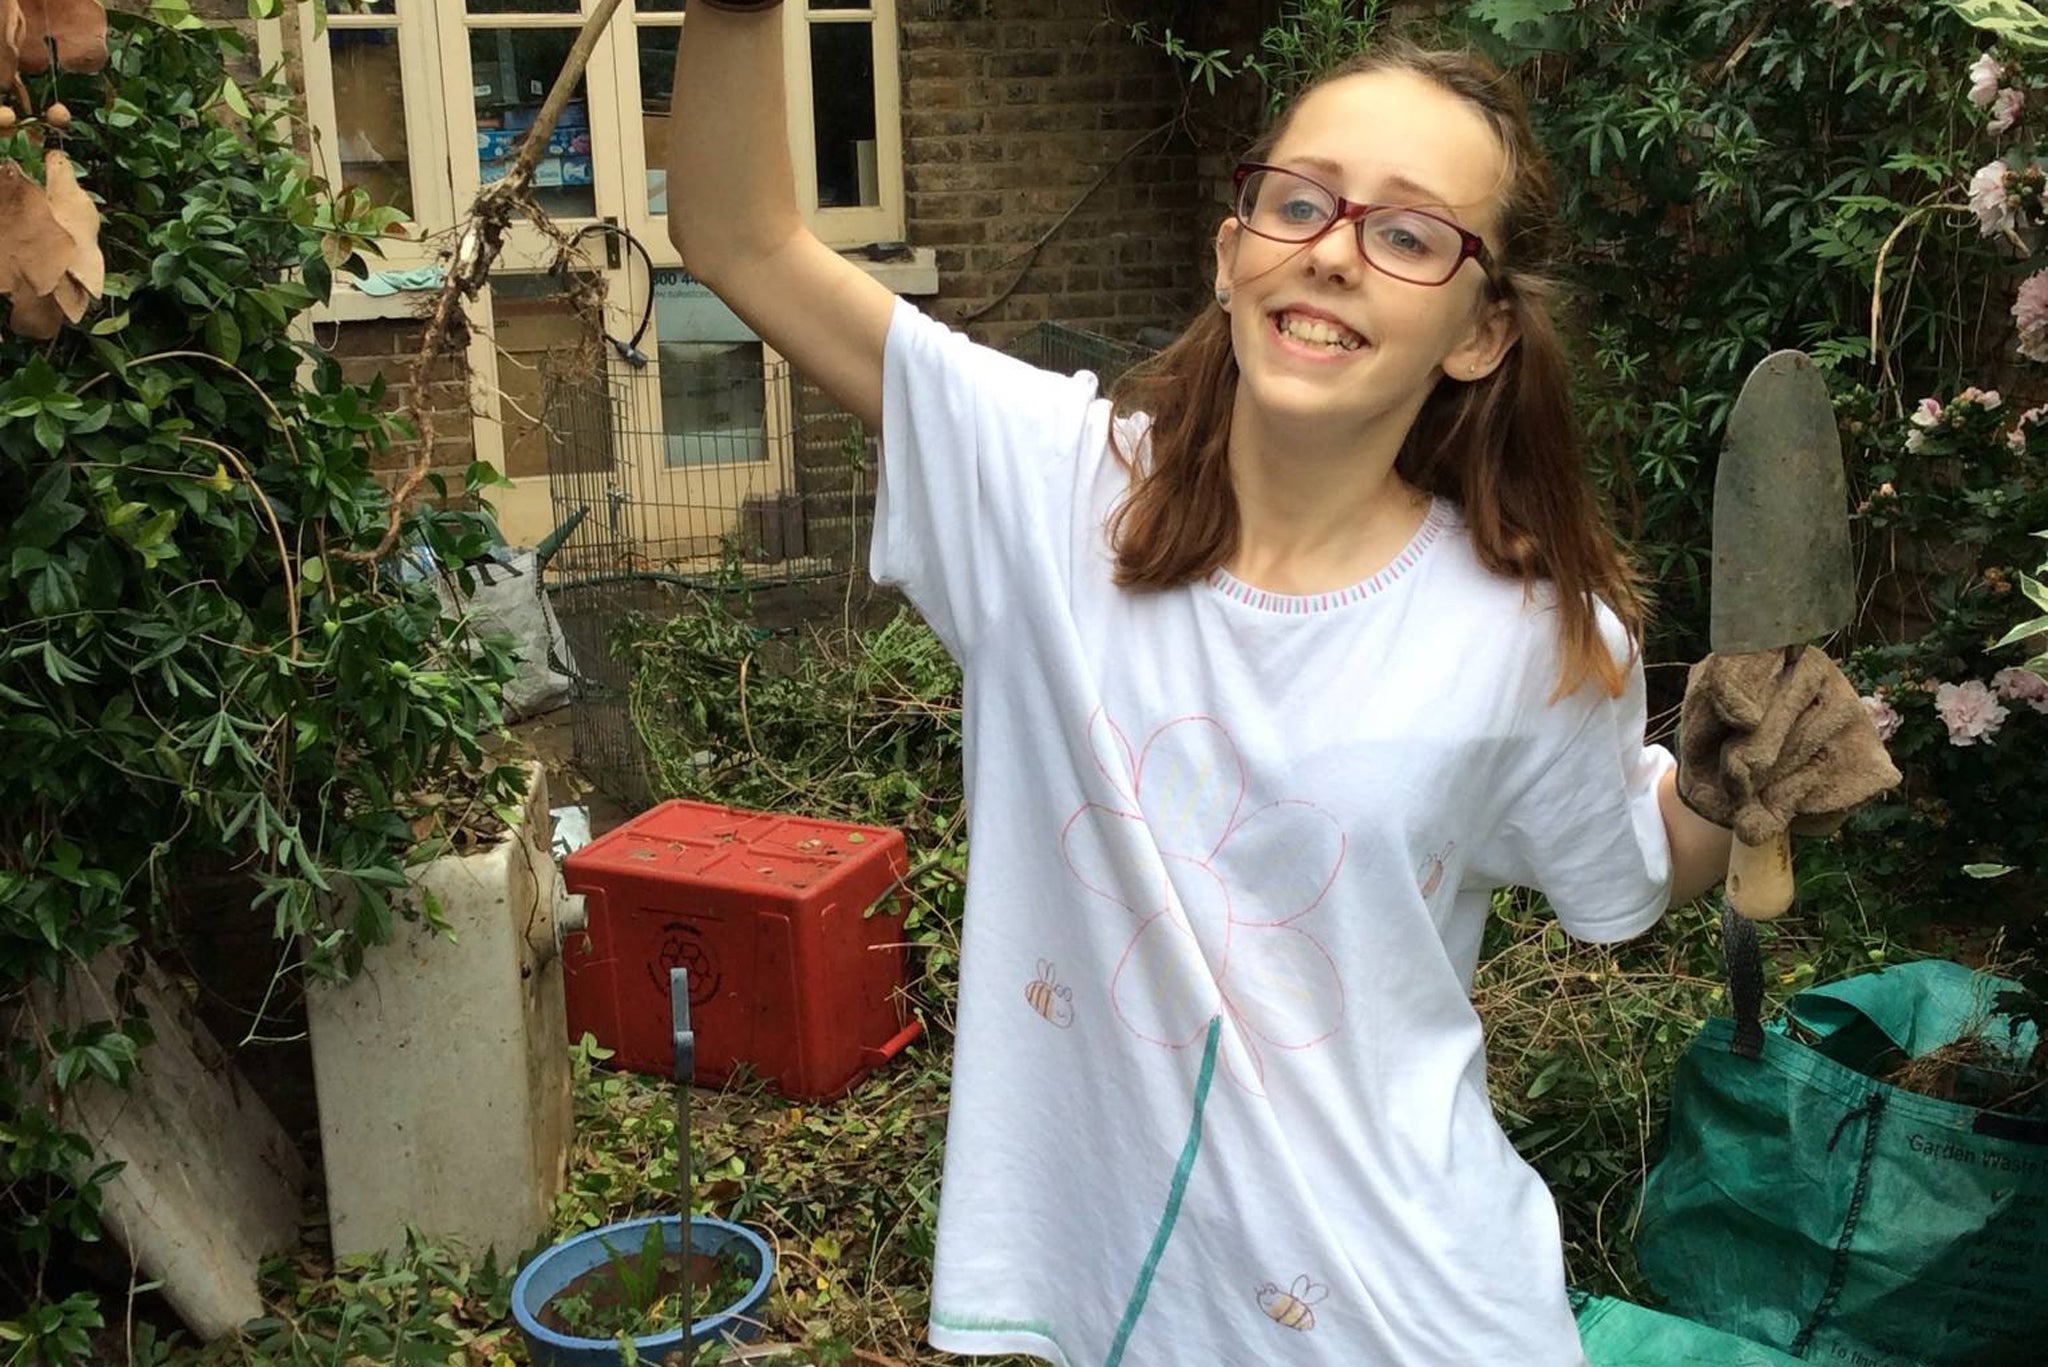 Alice Gross, 14, has been missing for one week, with her family and police 'increasingly worried' for her welfare